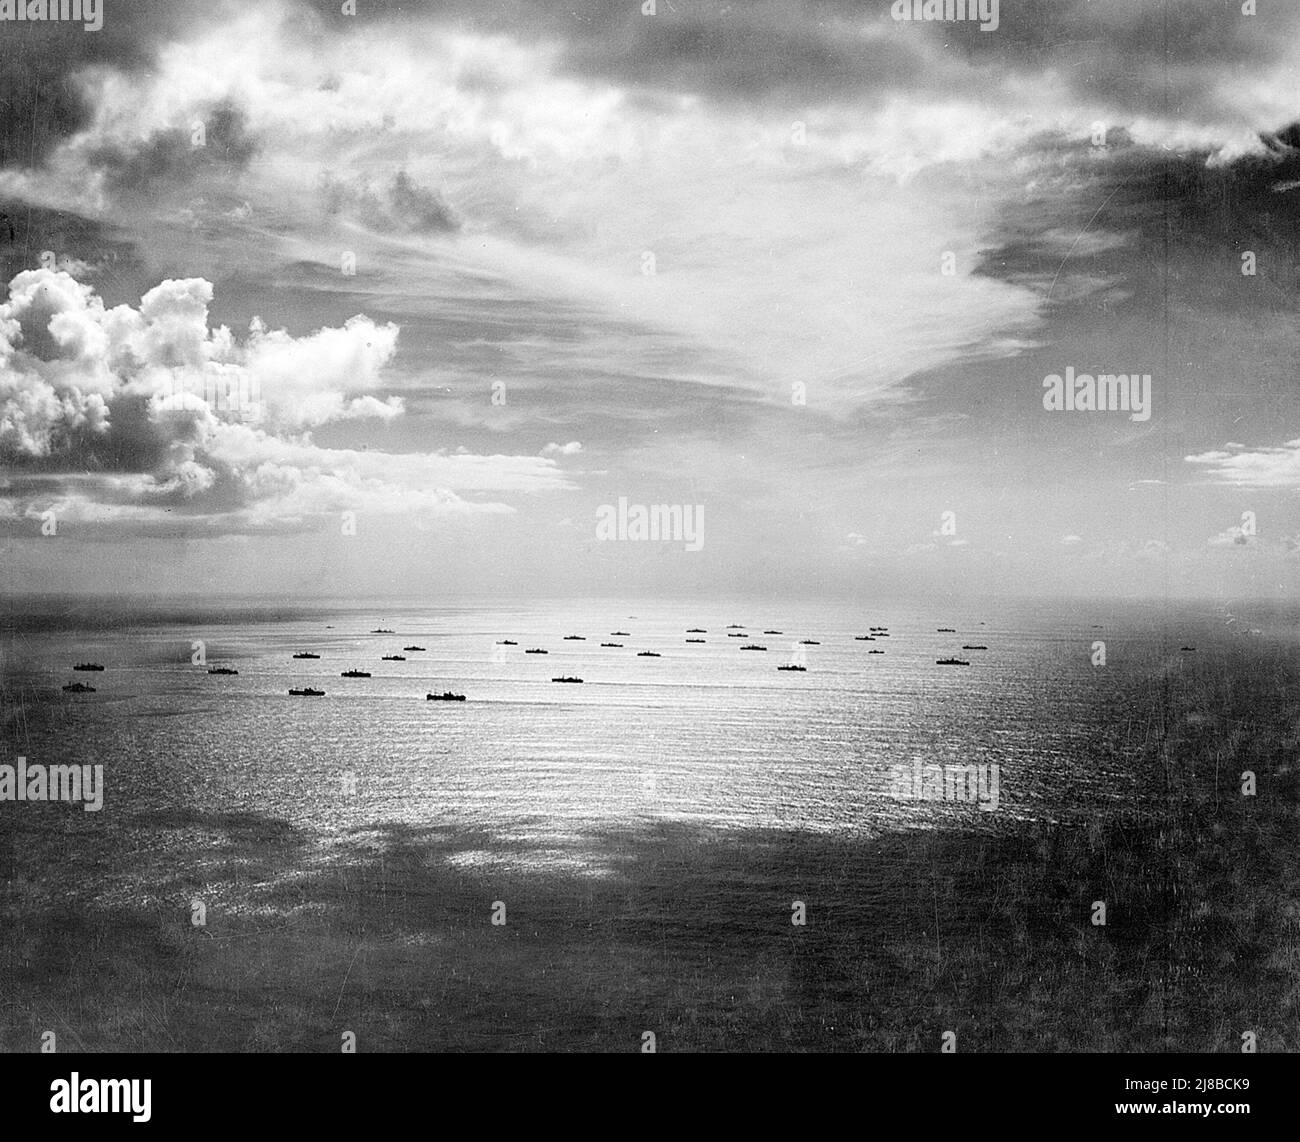 An allied convoy crossing the Atlantic during World War II Stock Photo